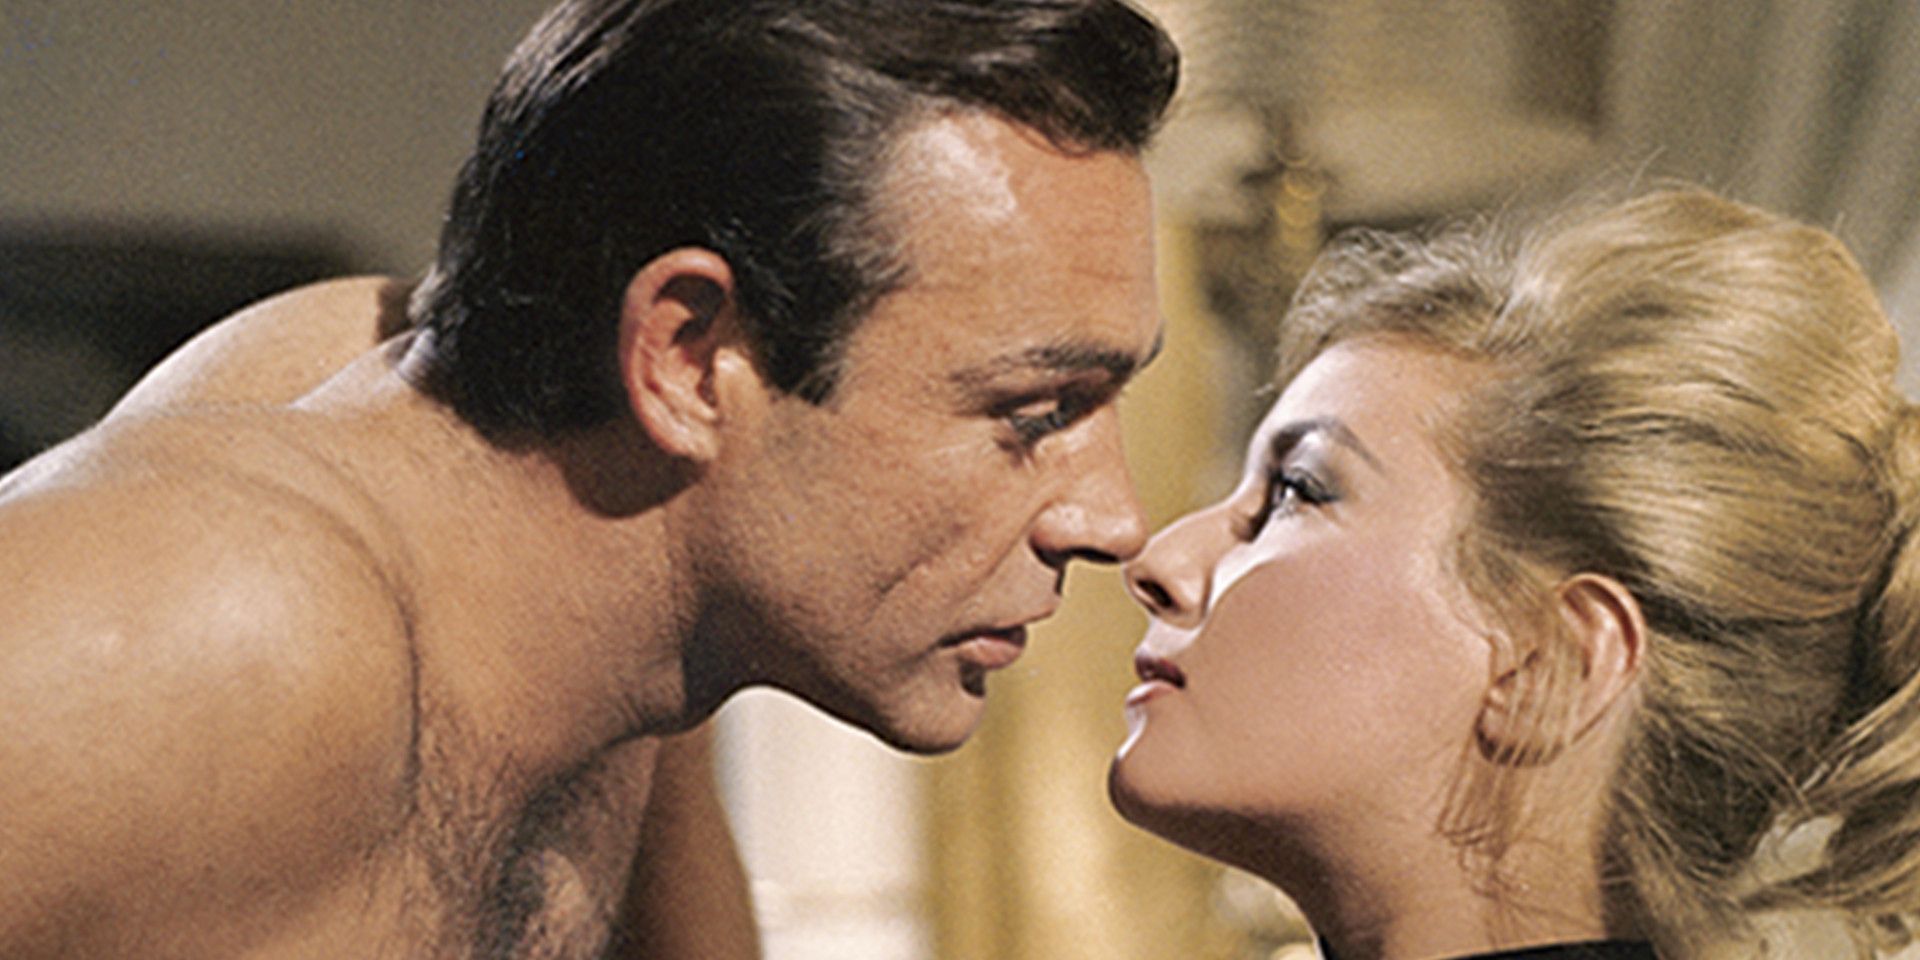 James Bond talks to Tatiana in bed in From Russia with Love